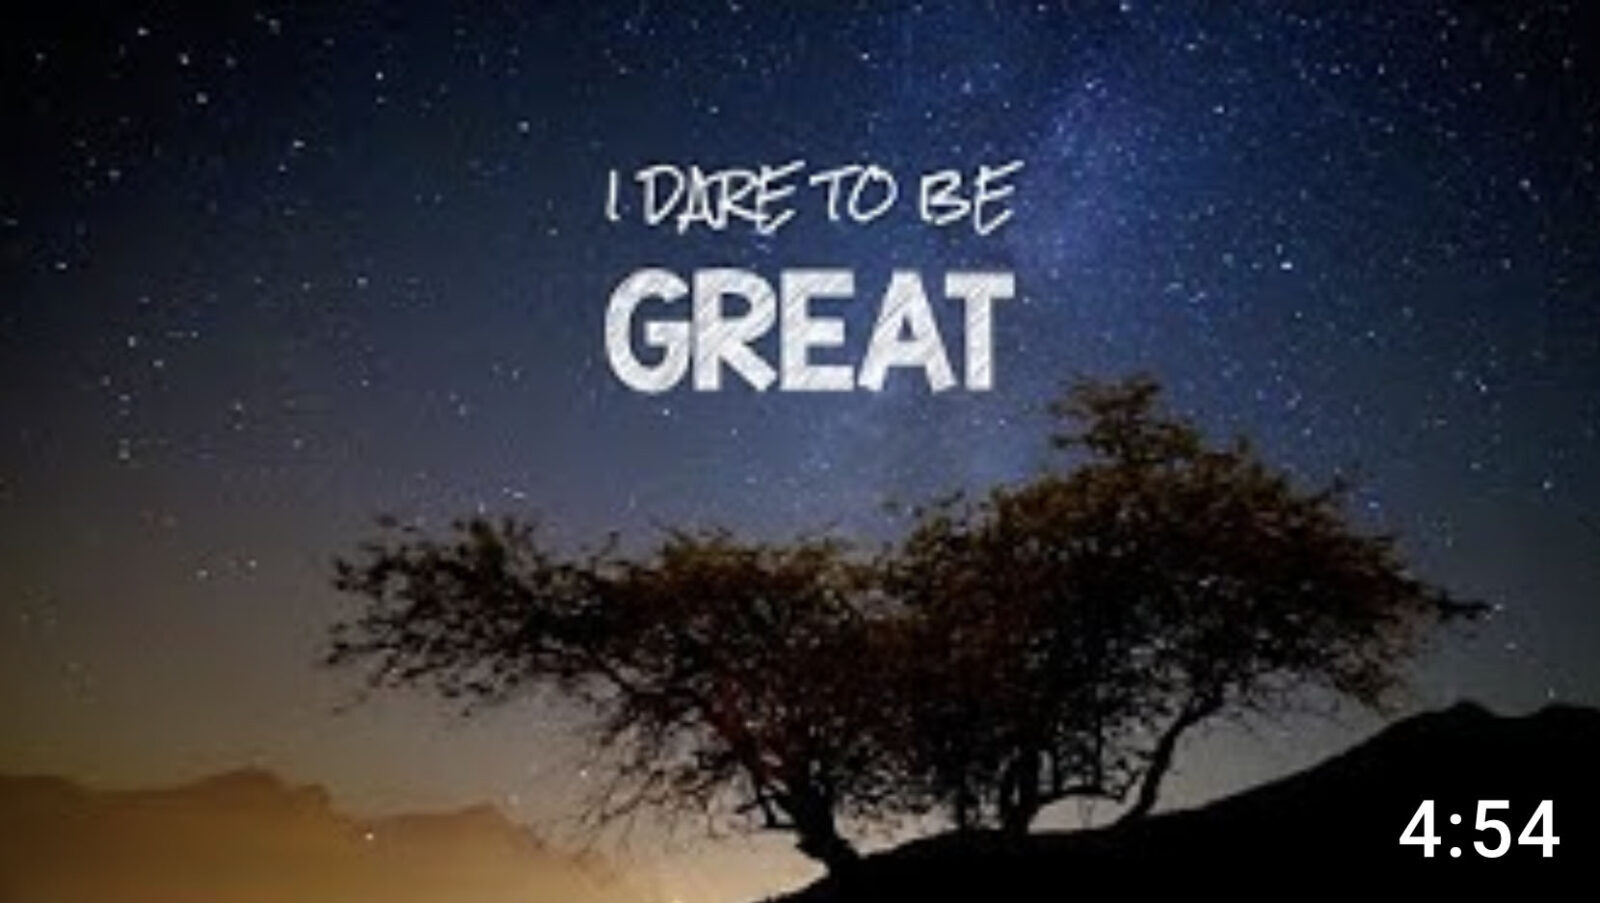 Video – Music Video “I dare to be great”